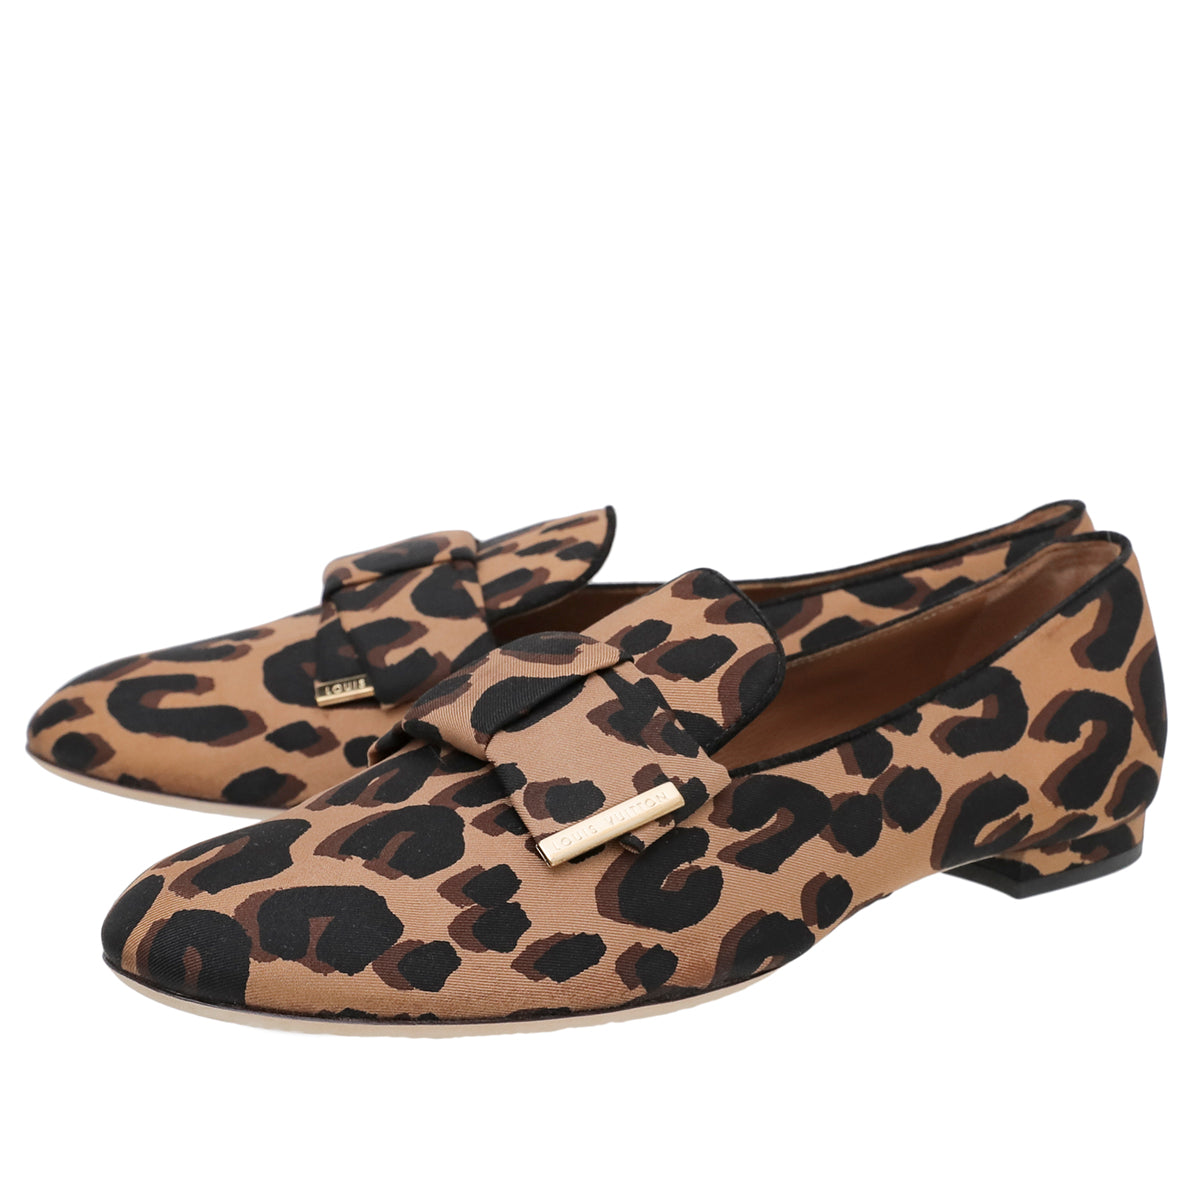 Louis Vuitton Leopard Print Stephen Sprouse Loafers 38.5 – The Closet